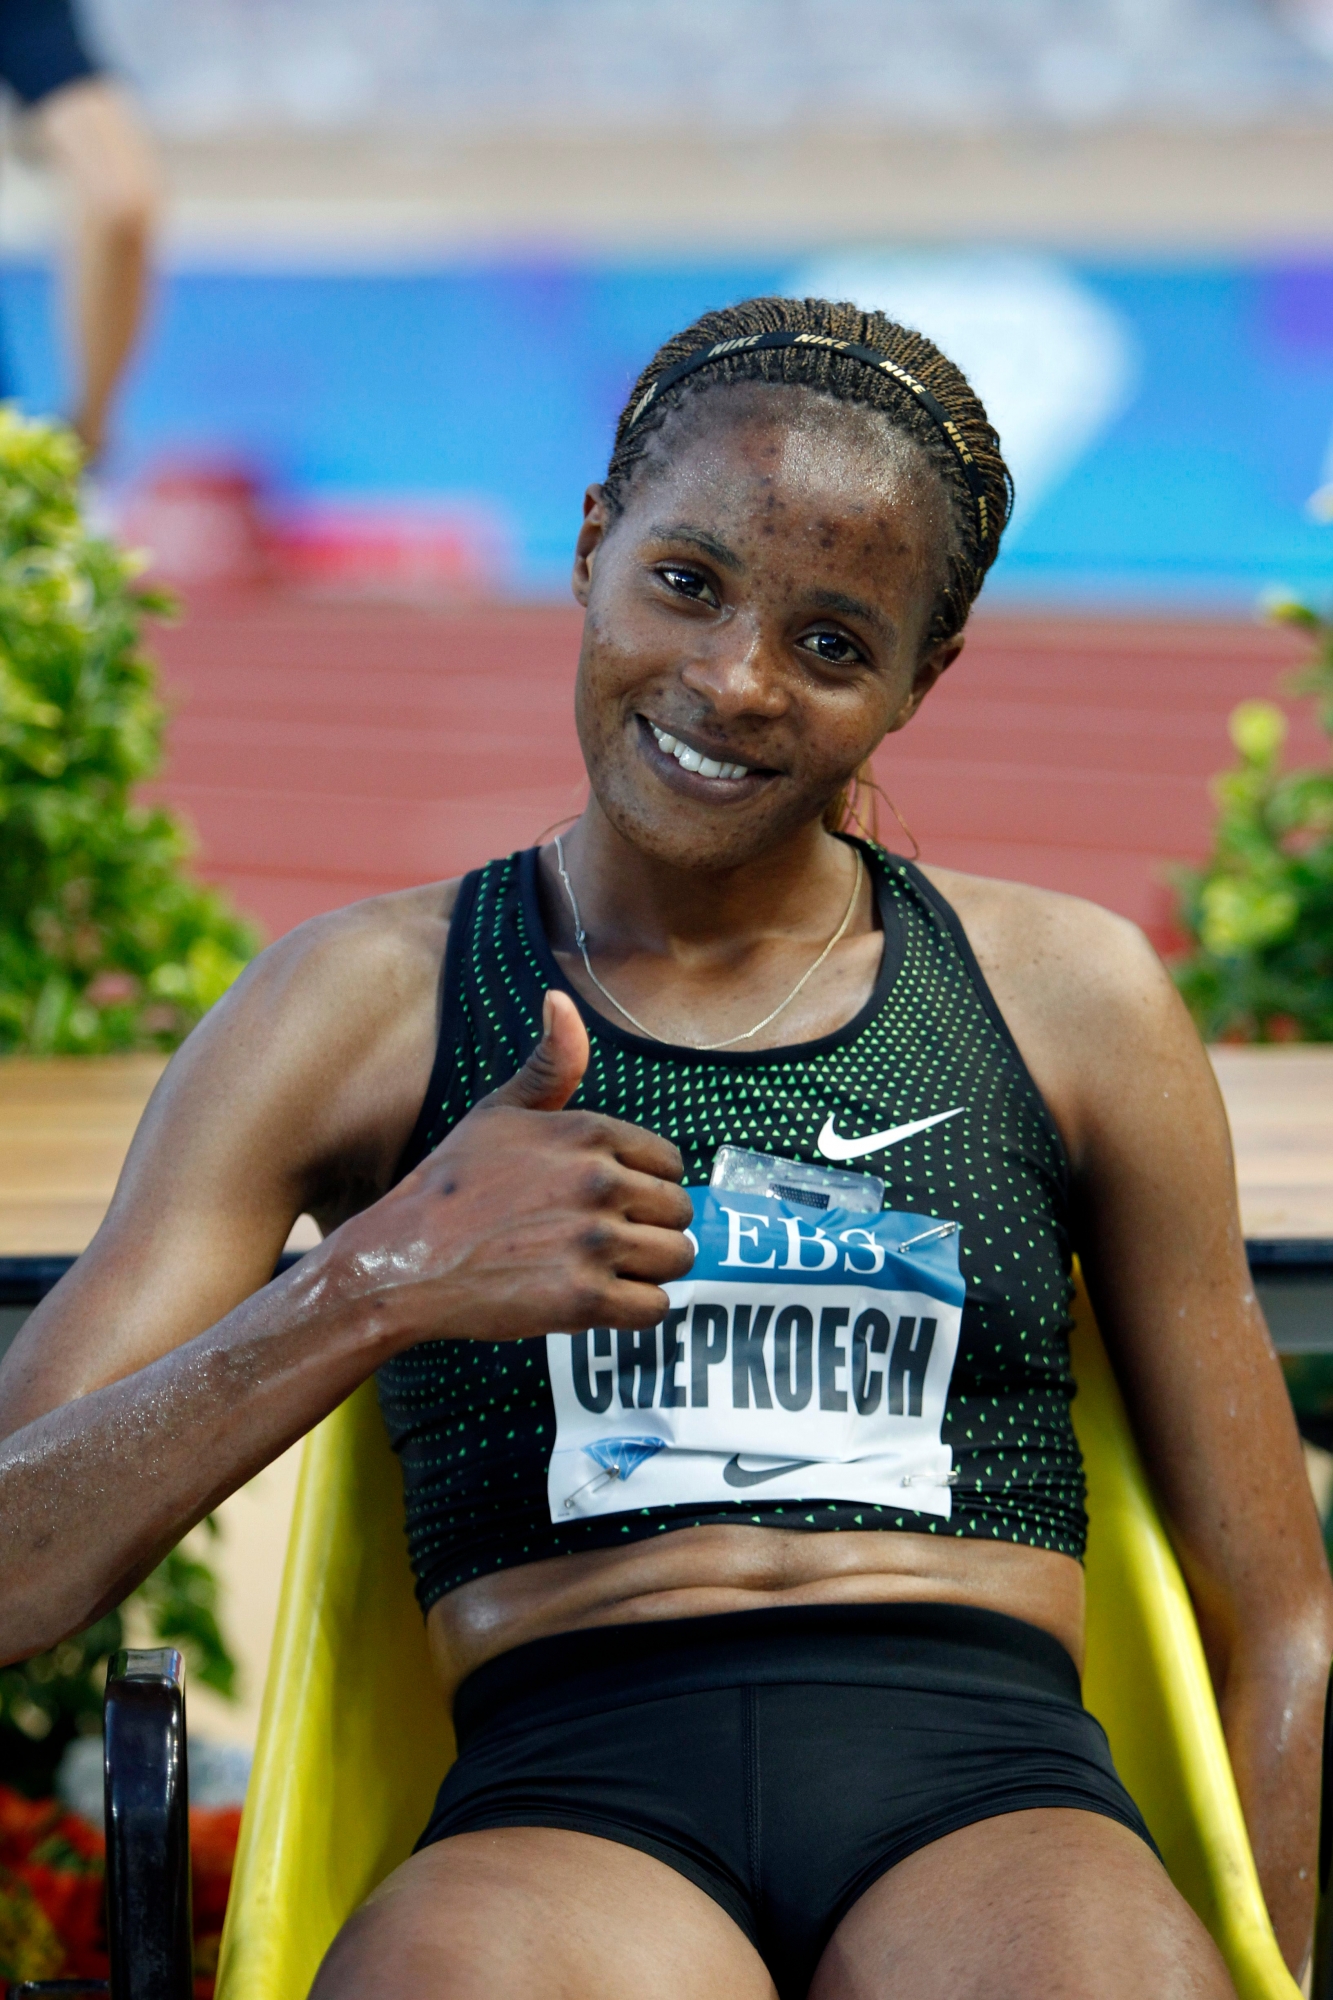 Kenya's Beatrice Chepkoech flashes a thumbs up after her women's 3000m steeplechase race during the IAAF Diamond League Athletics meeting at the Louis II Stadium in Monaco, Friday, July 20, 2018. (AP Photo/Claude Paris) Monaco Athletics Diamond League